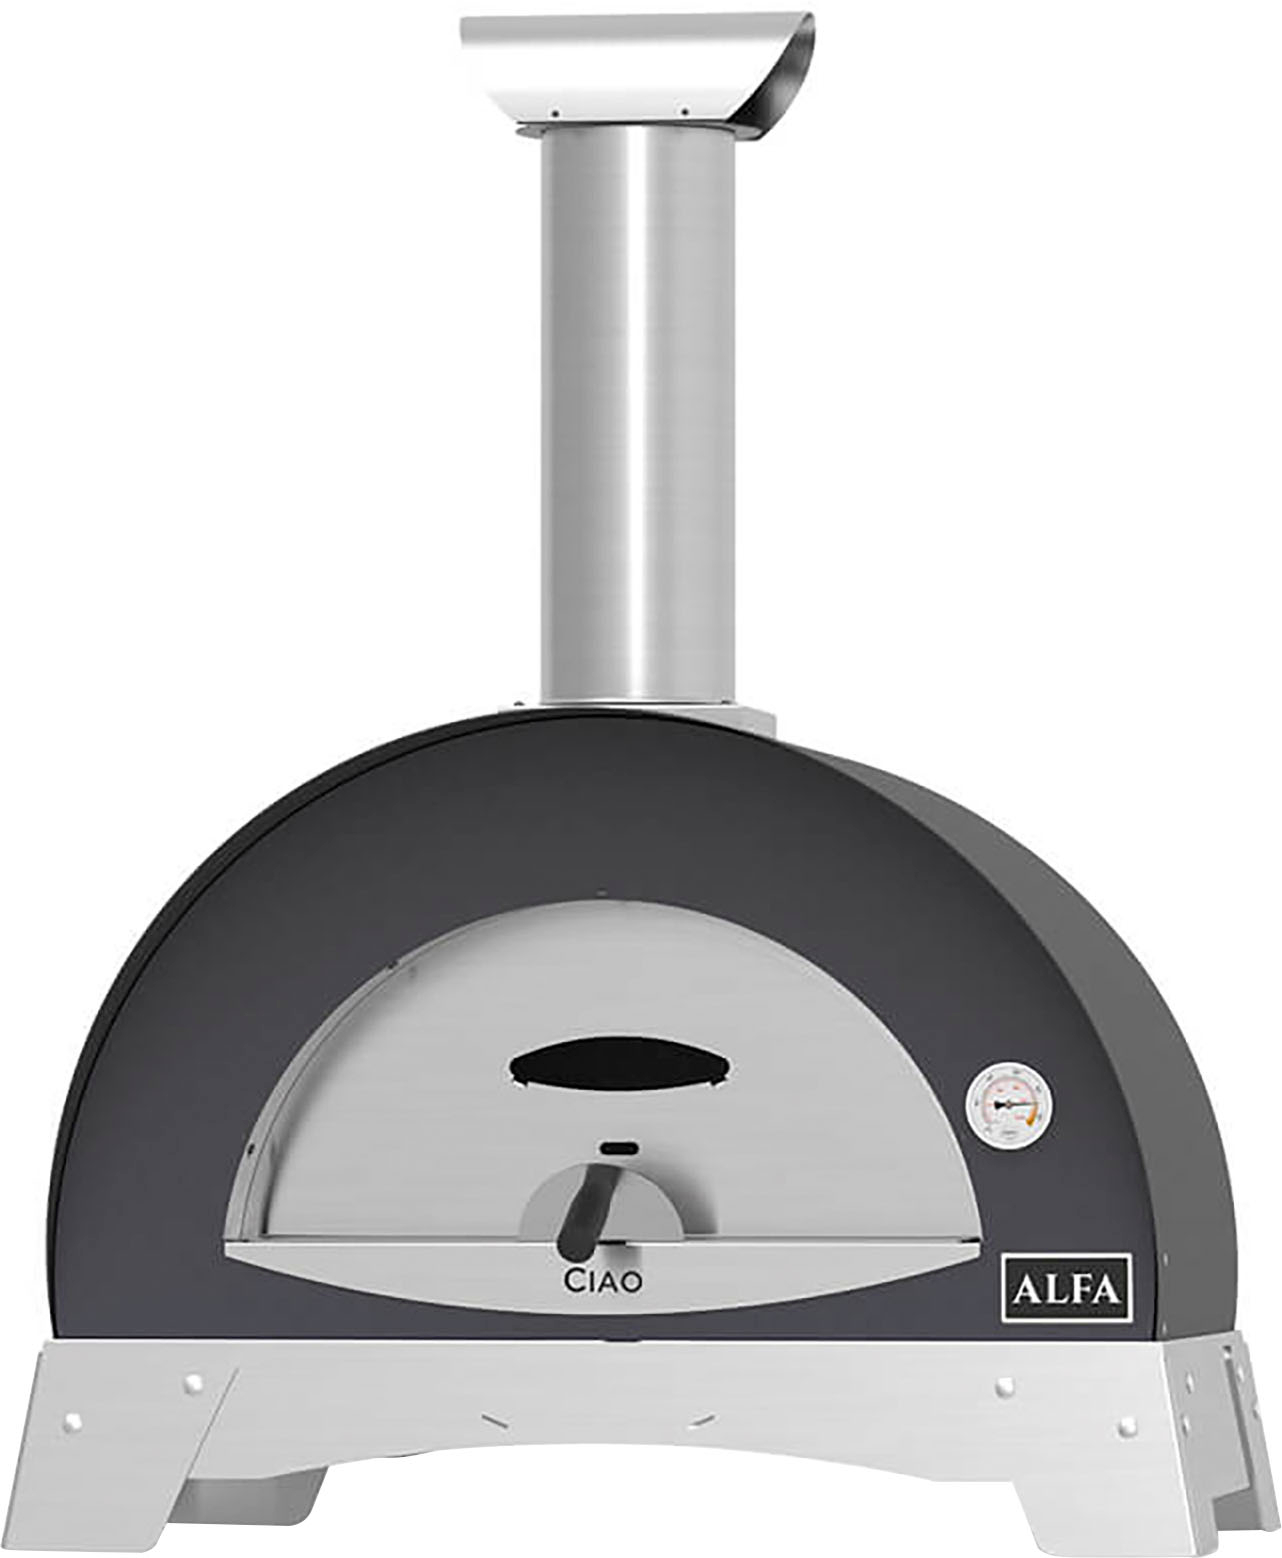 Left View: Alfa Ciao Countertop Portable Steel Outdoor Wood Fired Pizza Oven, Gray